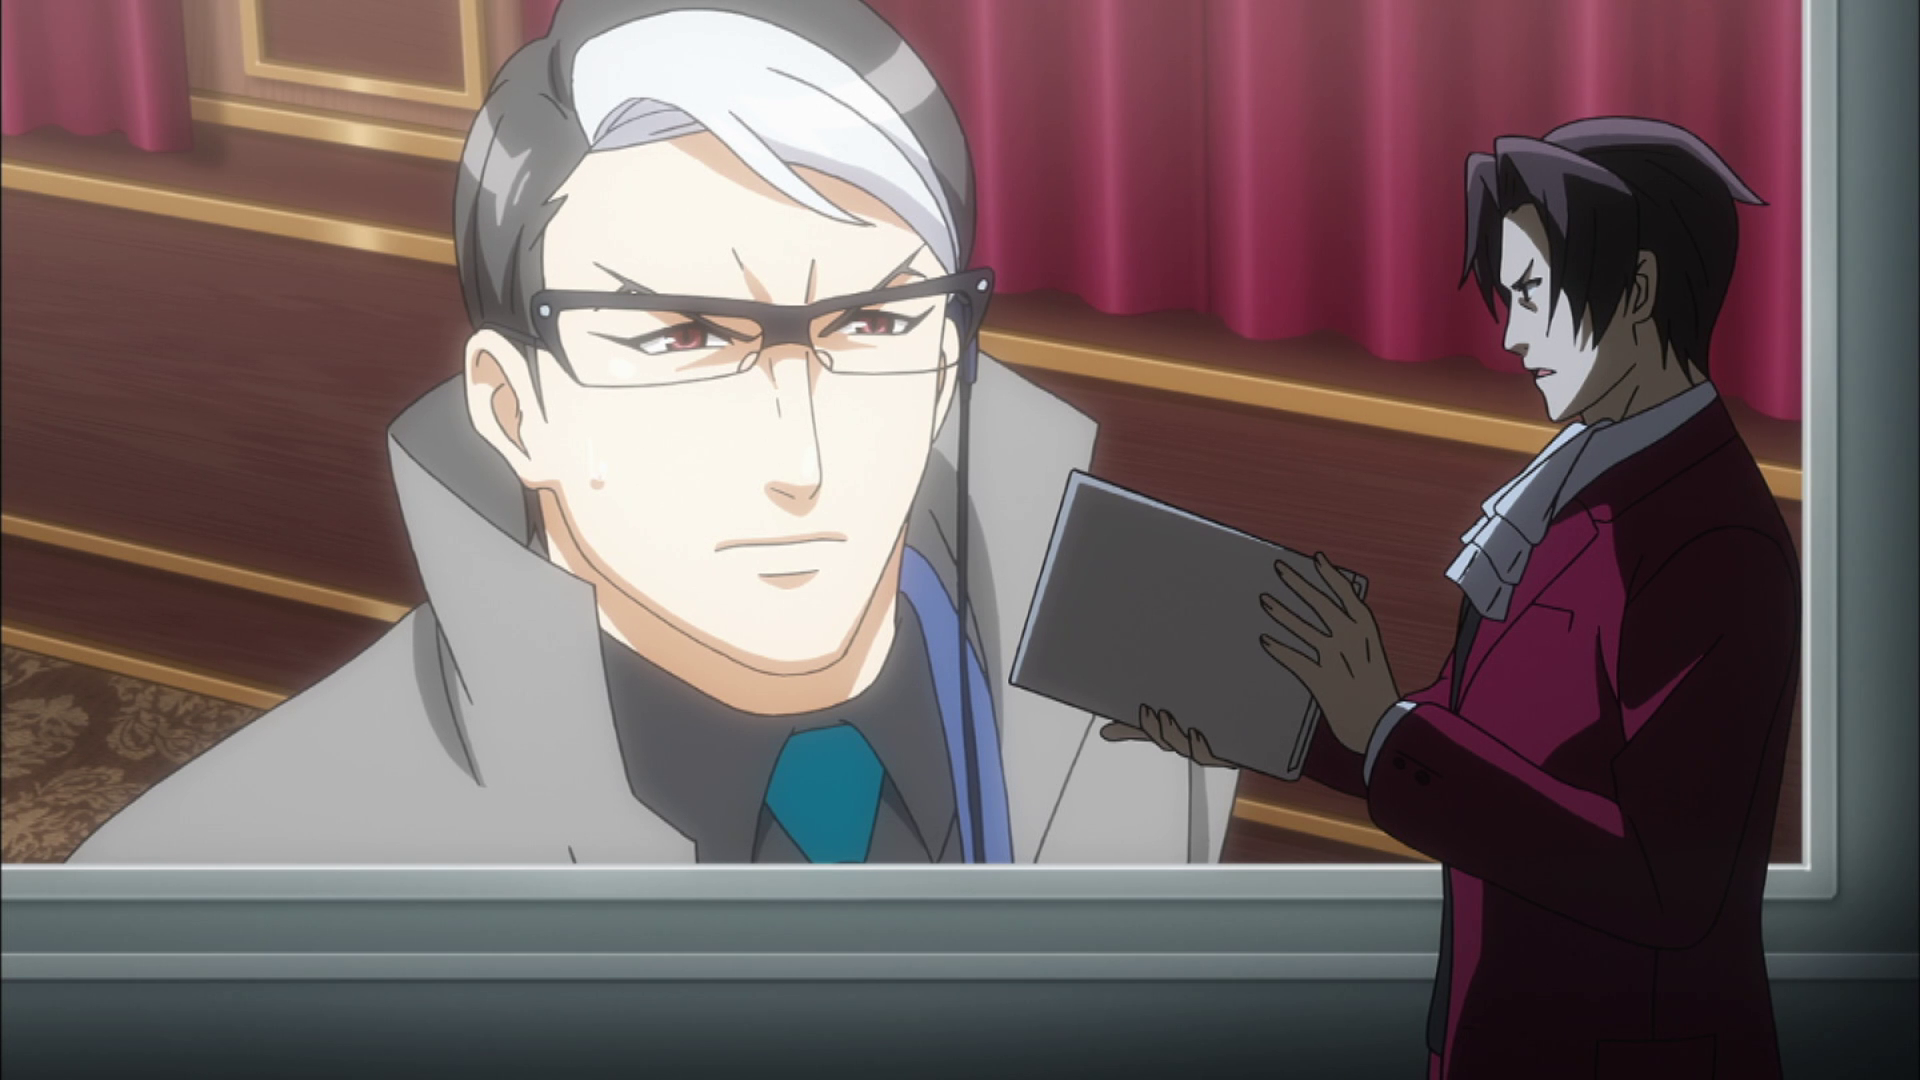 Ace Attorney Anime Episode 1 Review: Not Guilty! | The Nerd Stash